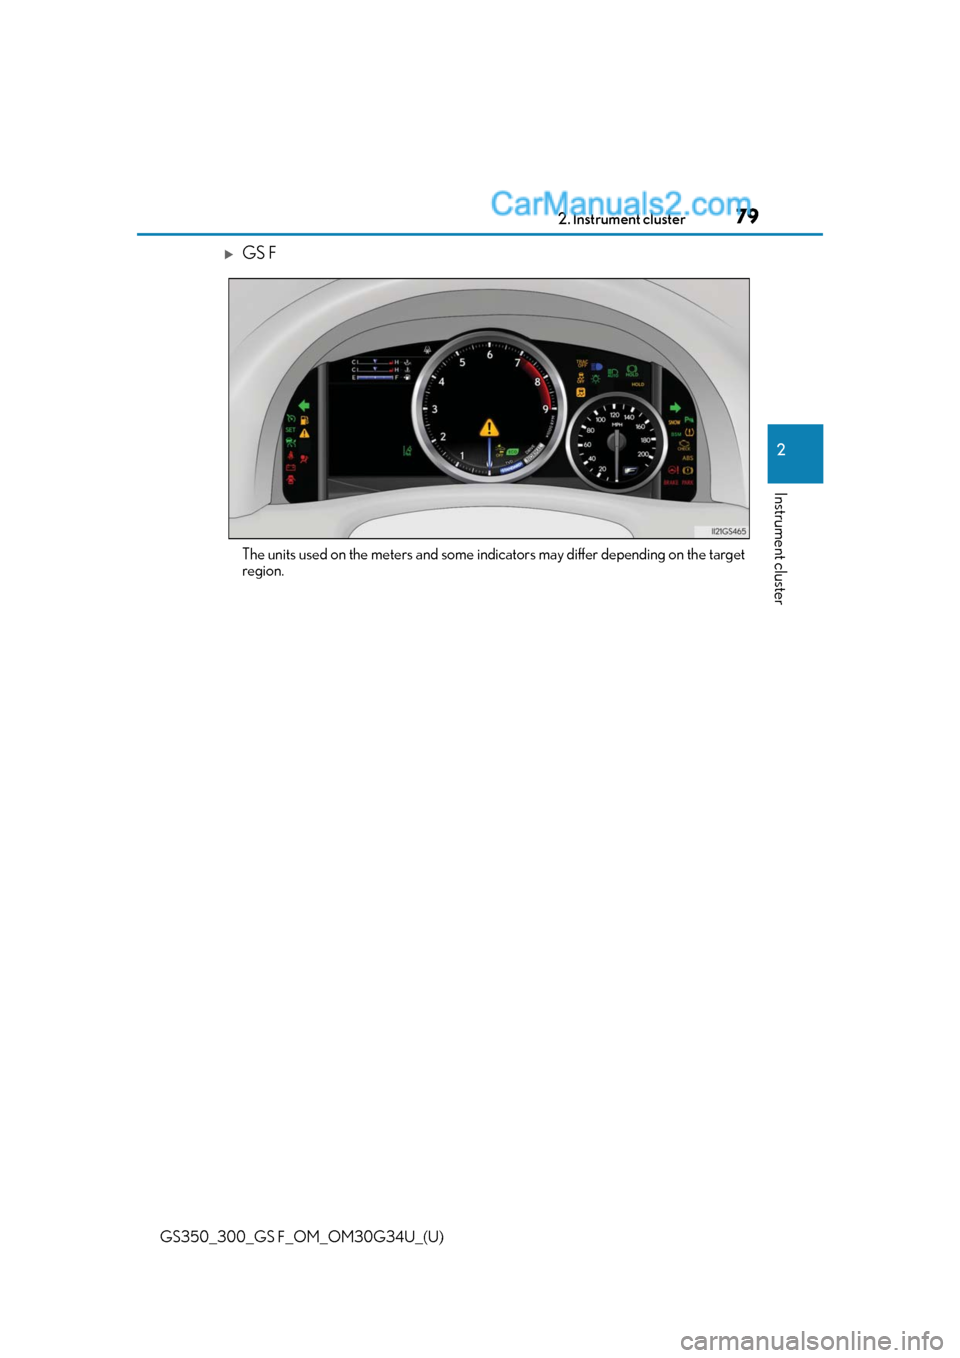 Lexus GS300 2018  s Manual PDF GS350_300_GS F_OM_OM30G34U_(U)
792. Instrument cluster
2
Instrument cluster
GS F
The units used on the meters and some indicators may differ depending on the target
region.  